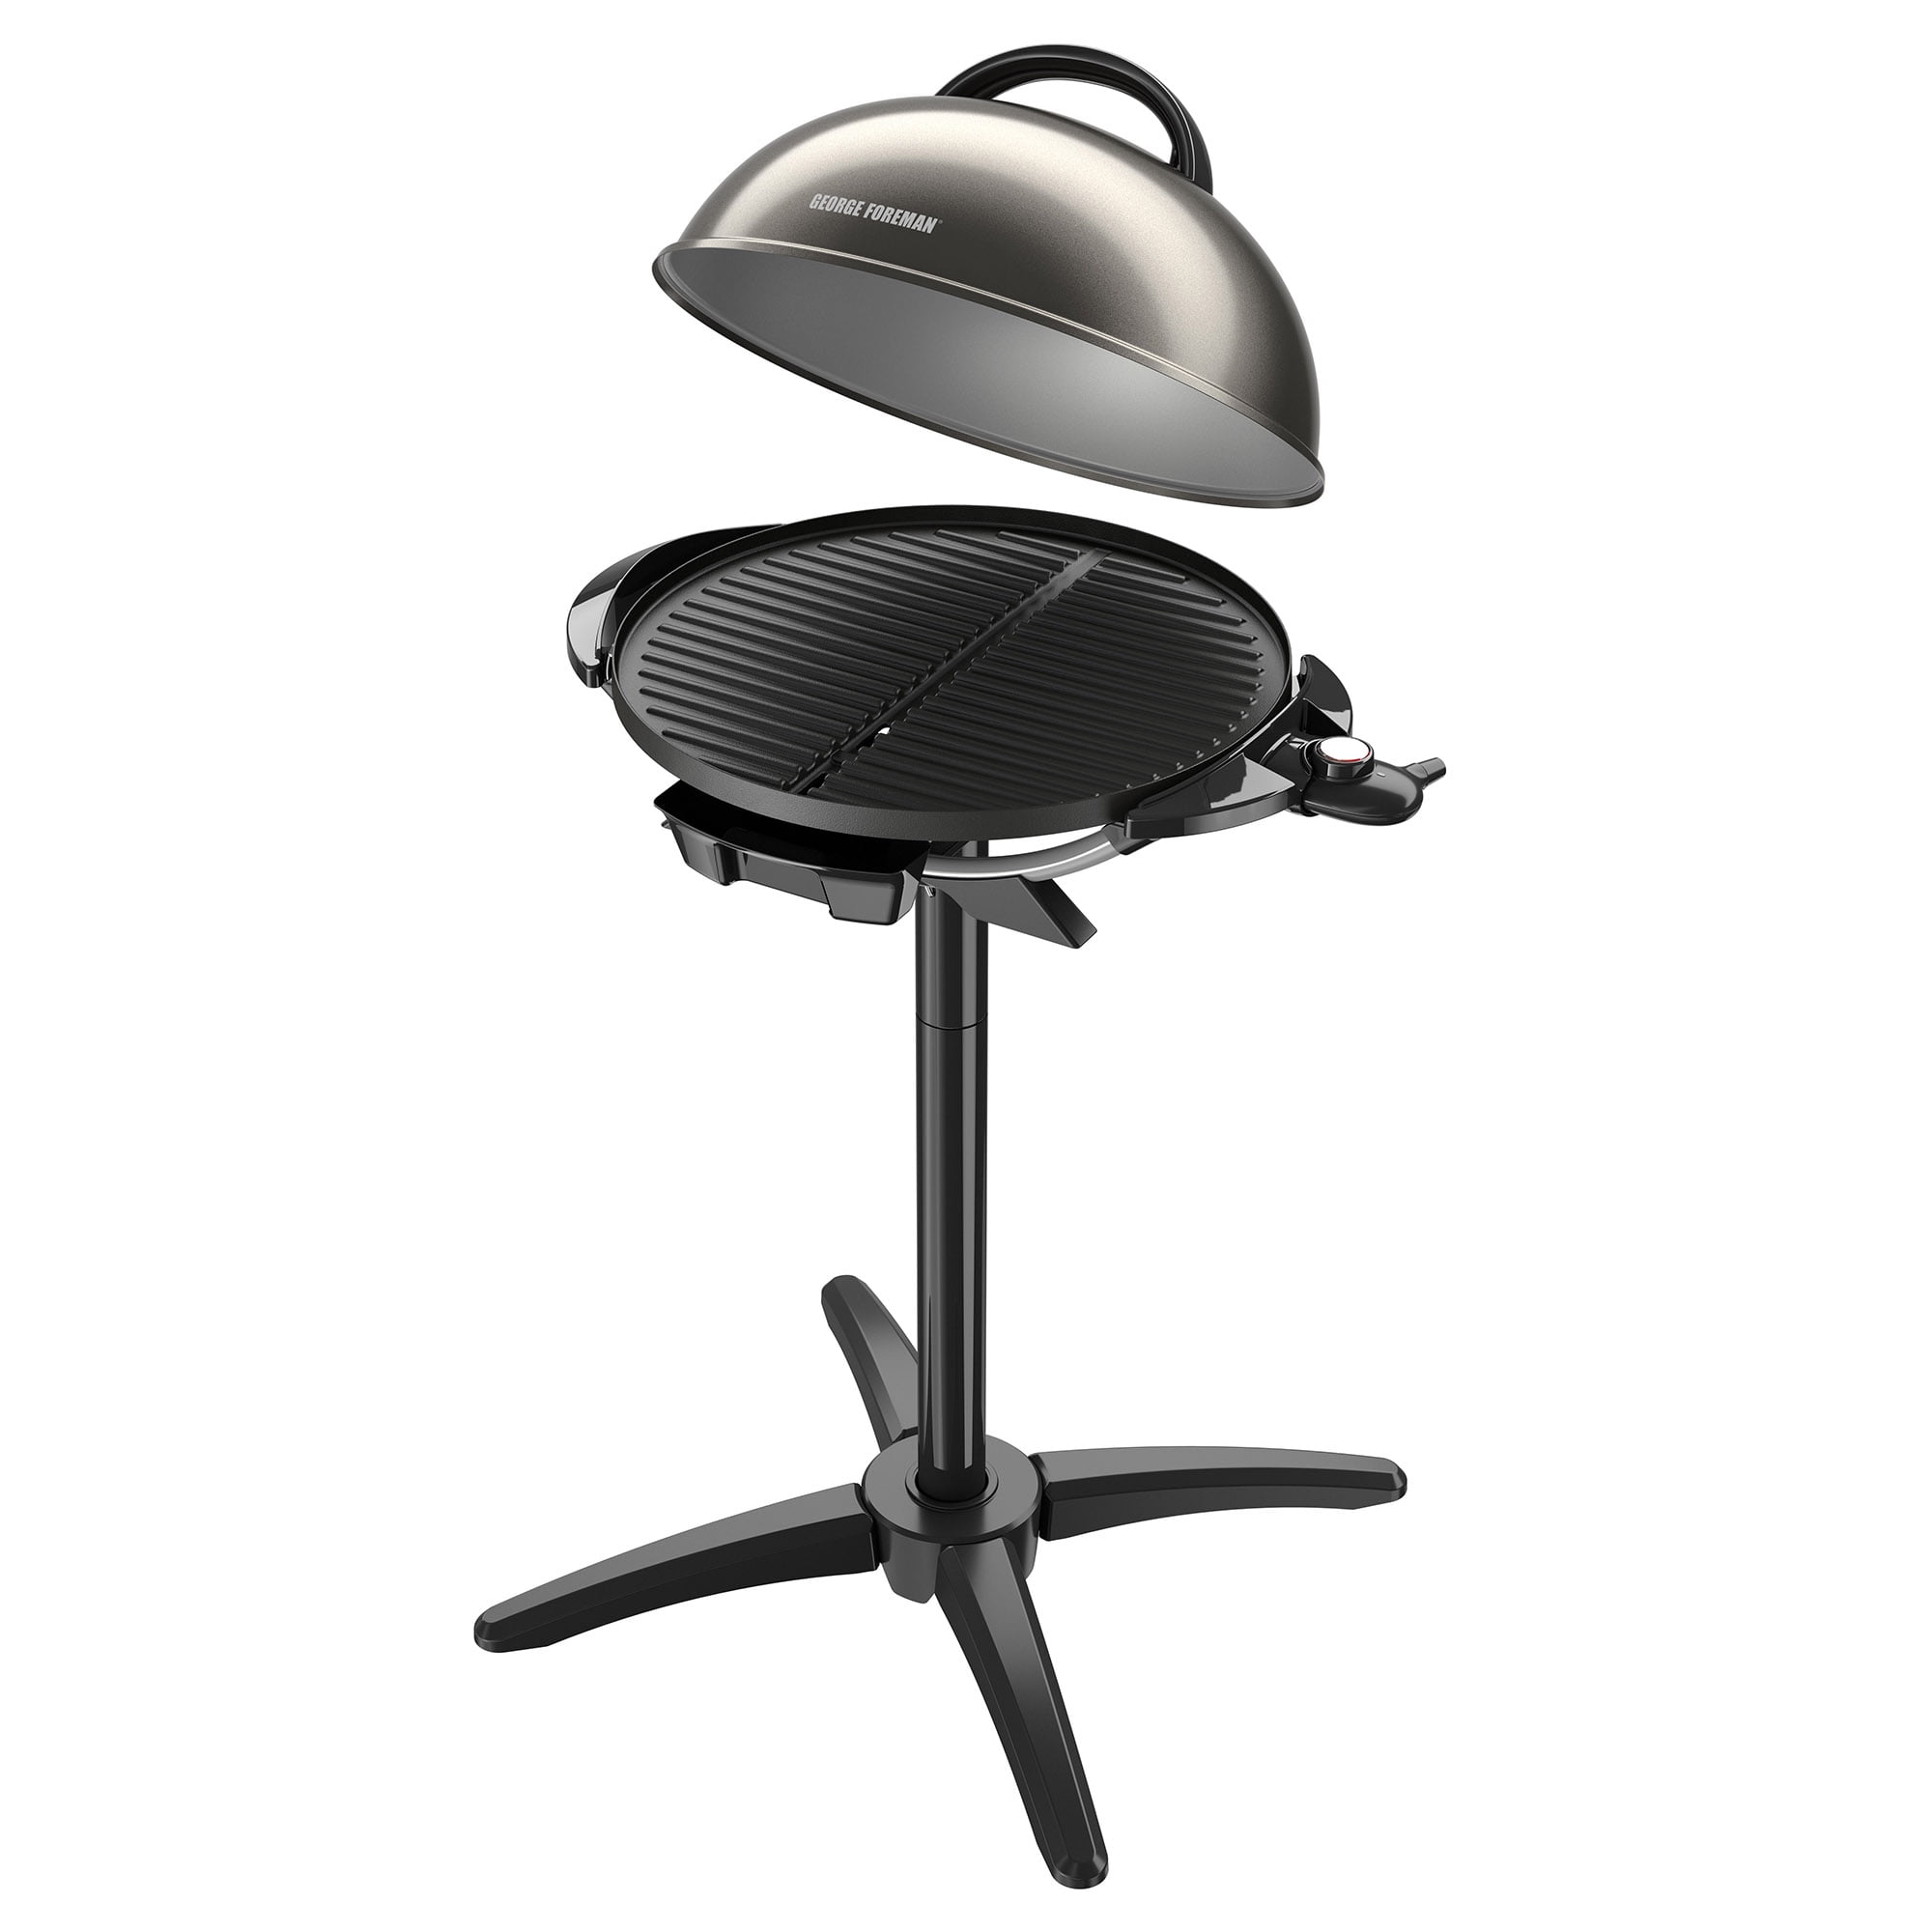 The George Foreman indoor/outdoor grill is on sale for $59.99 at